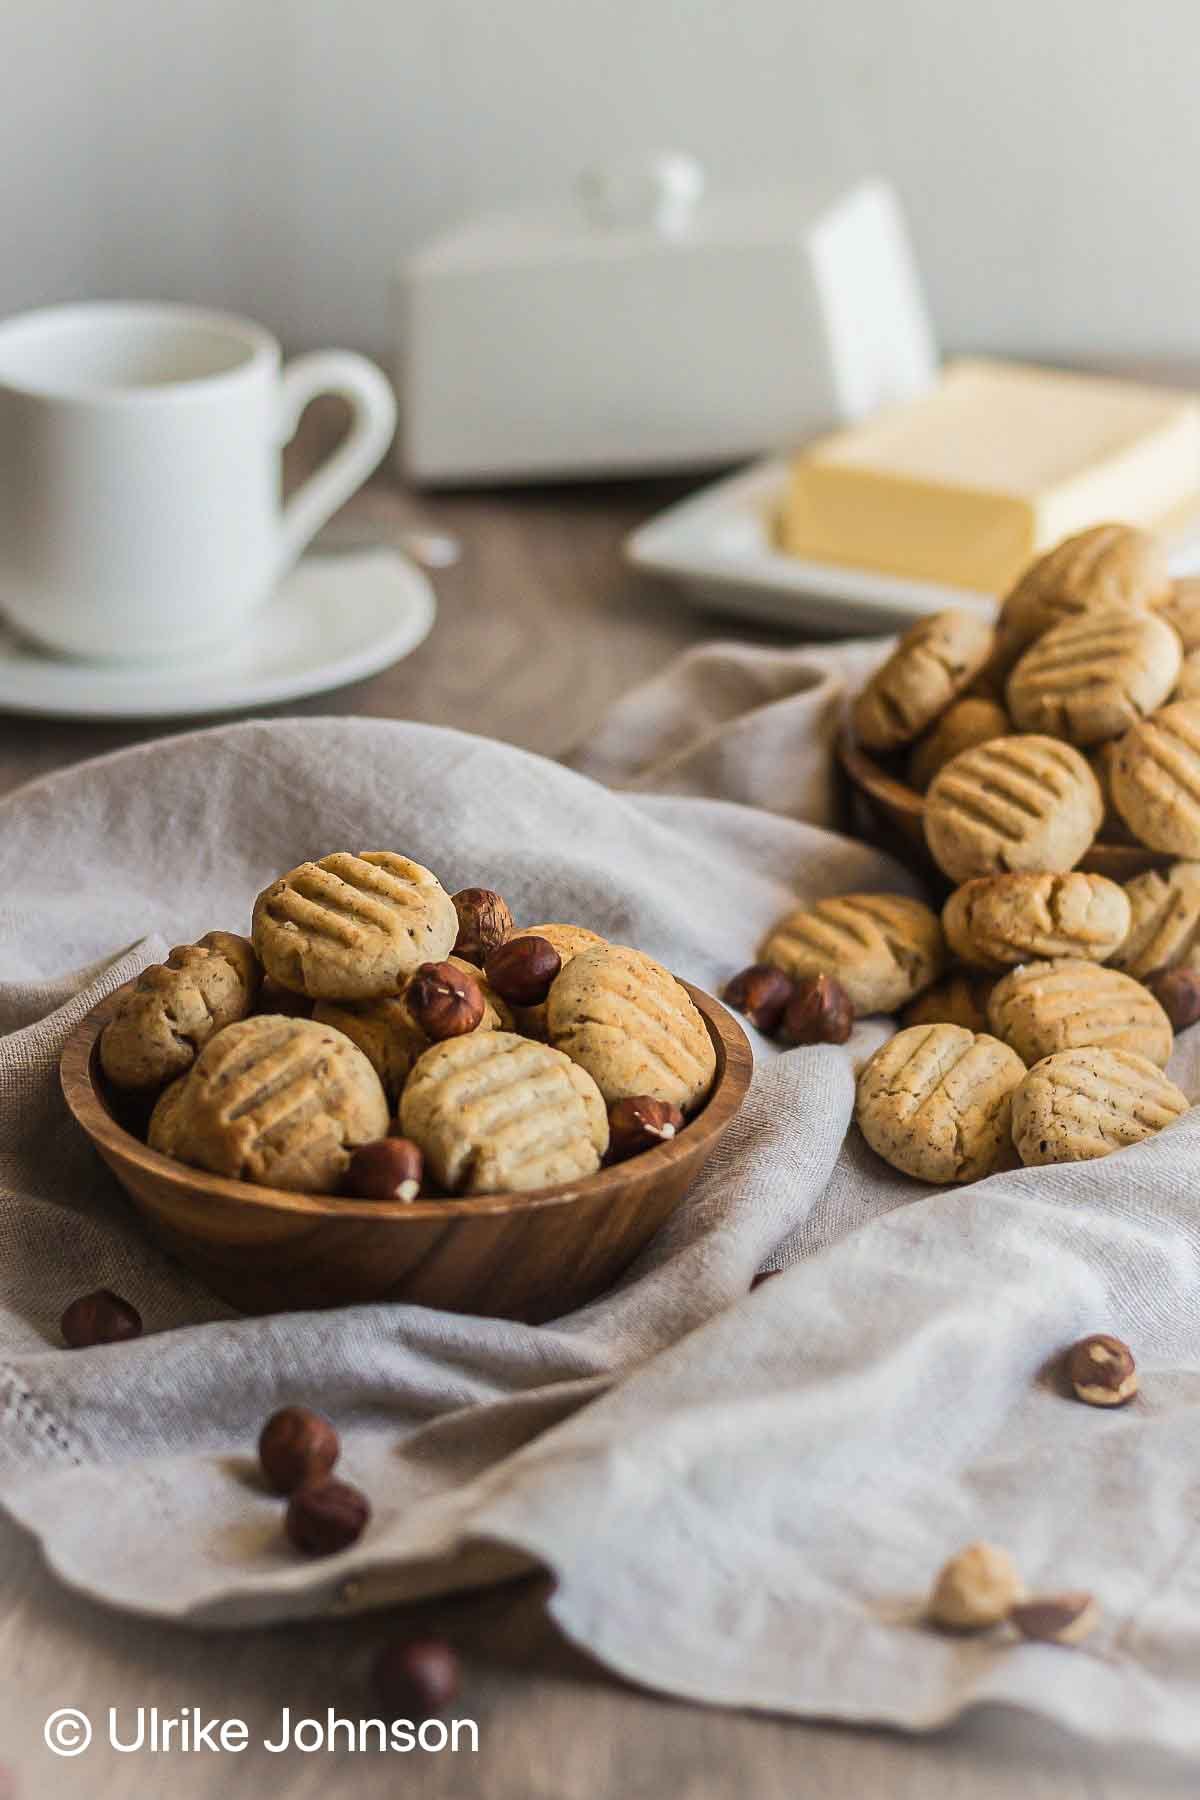 German hazelnut cookies in a wooden bowl surrounded with whole hazelnuts and a butter dish in the background